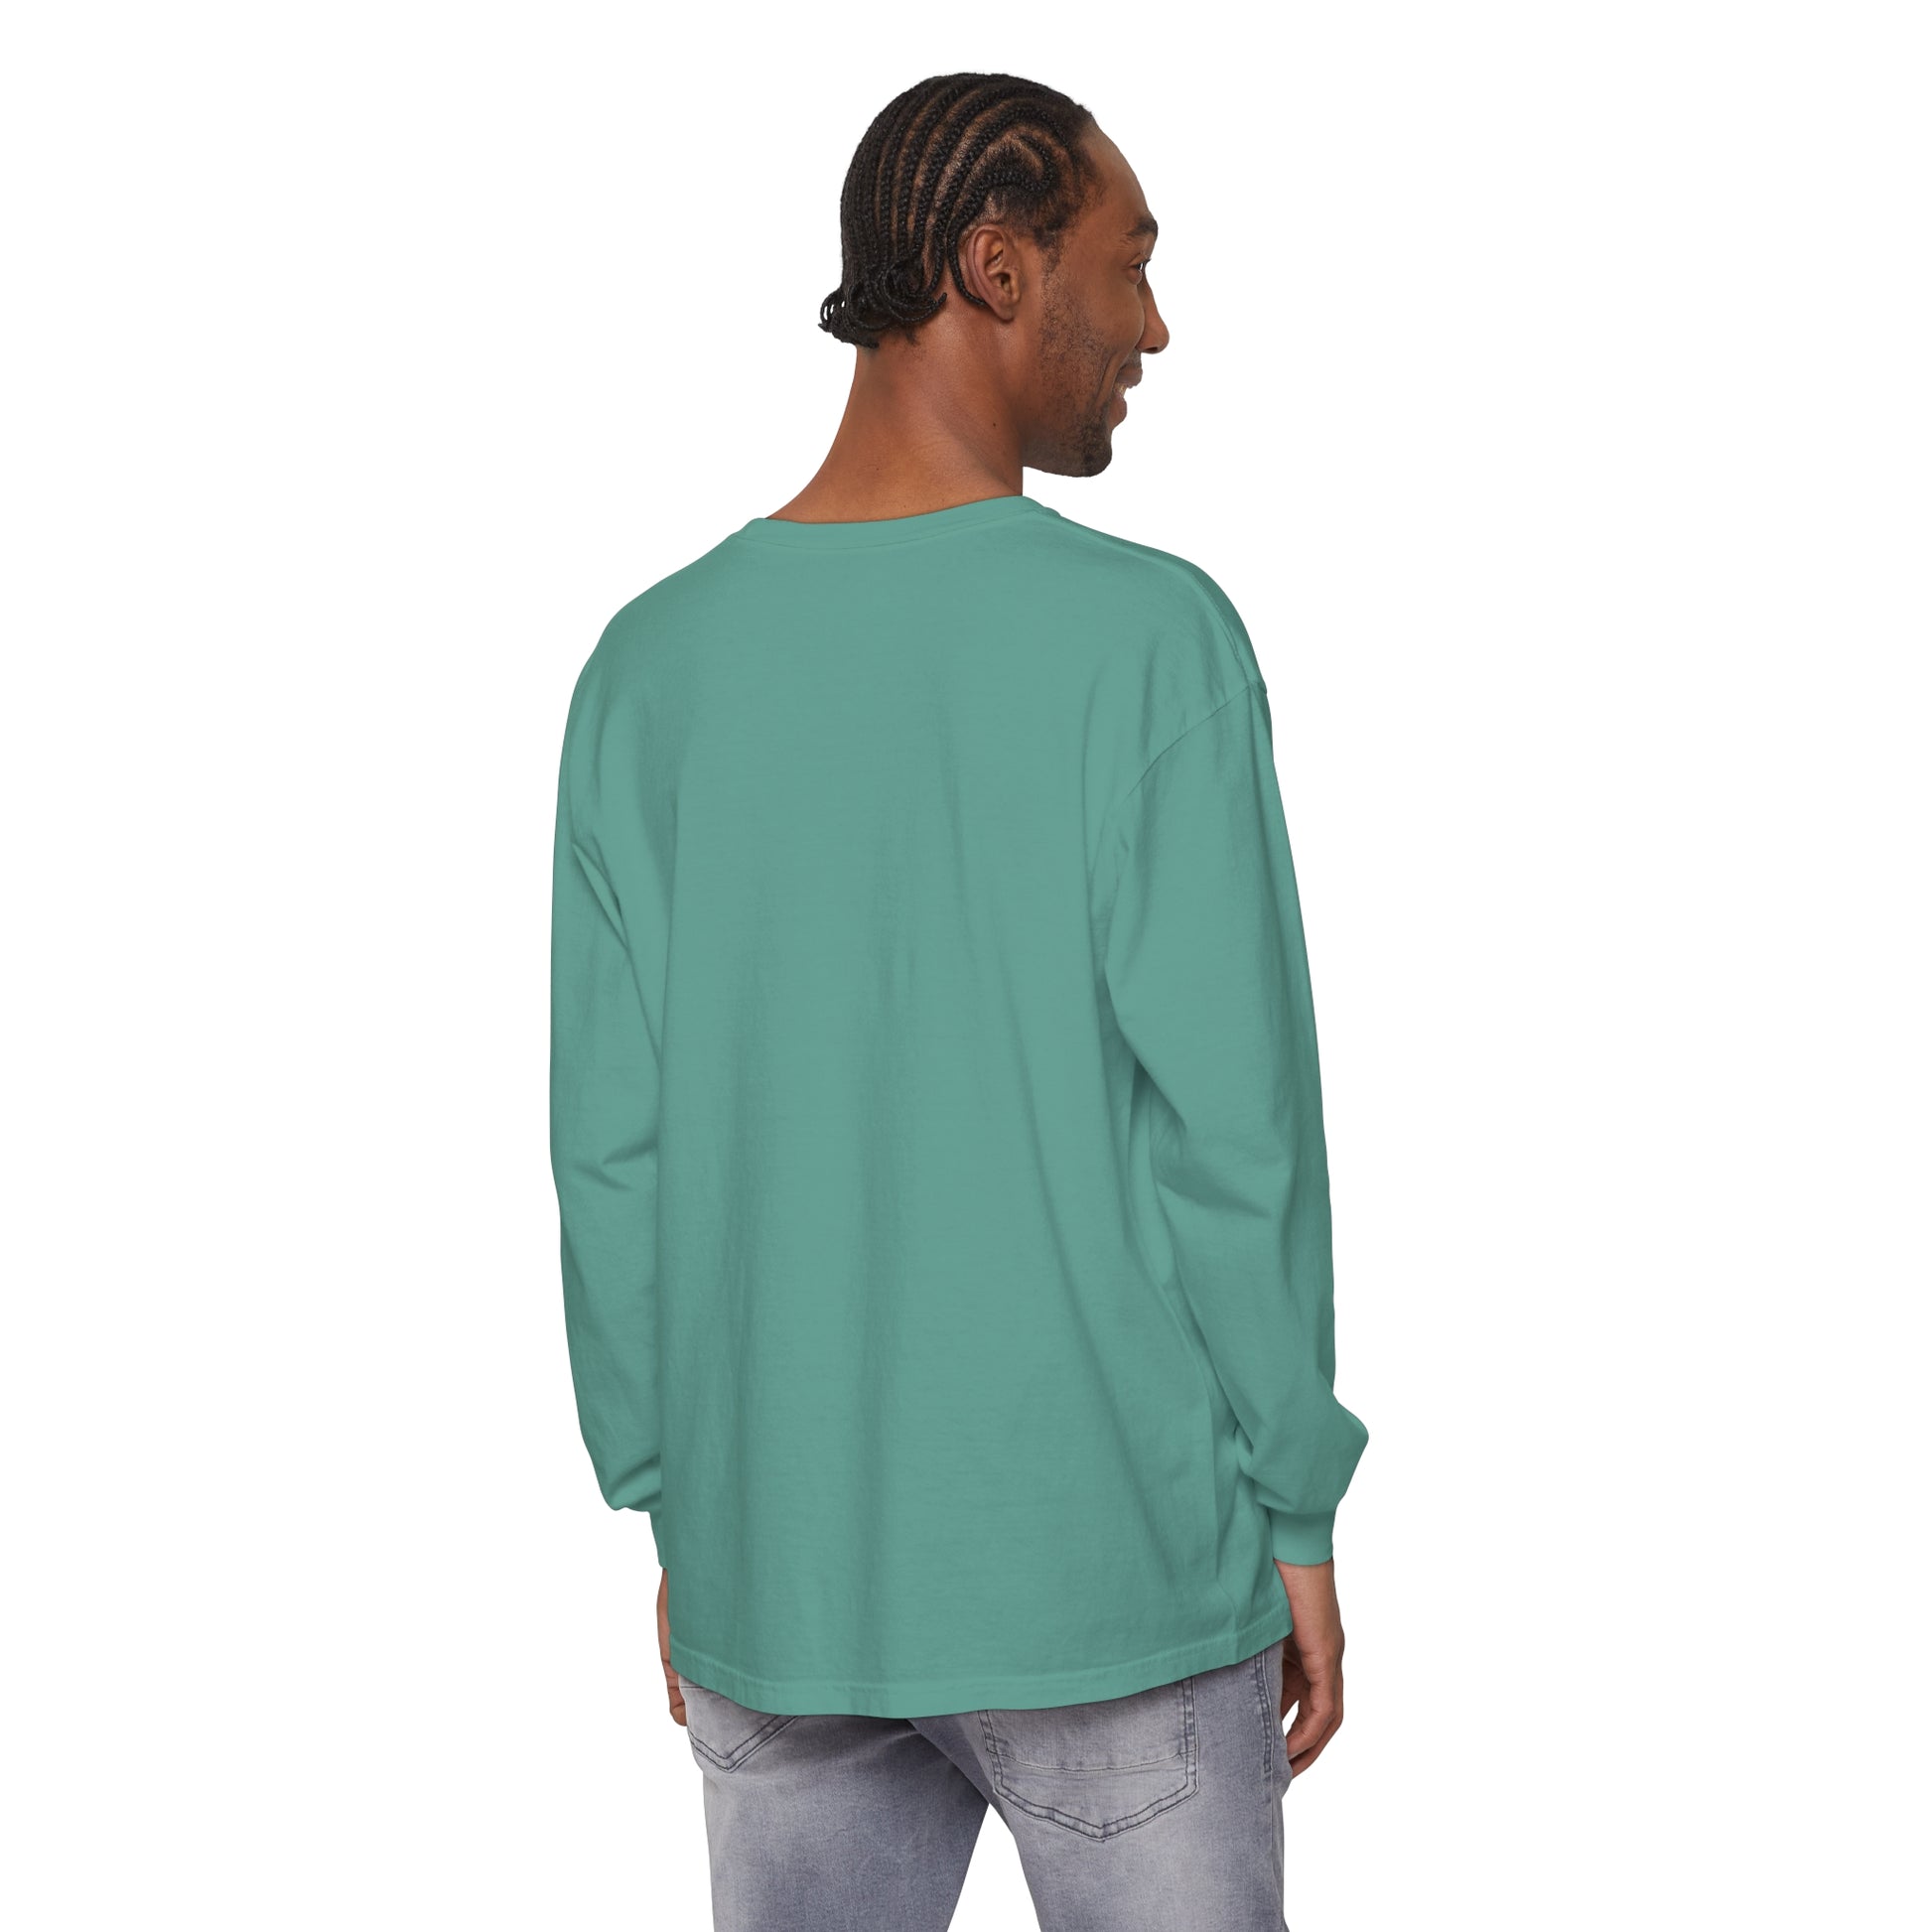 The back of a man wearing a cozy and stylish green long sleeve t-shirt, the Copy of Tis the Season Ivory Christmas Tree Shirt from his winter wardrobe by Printify.